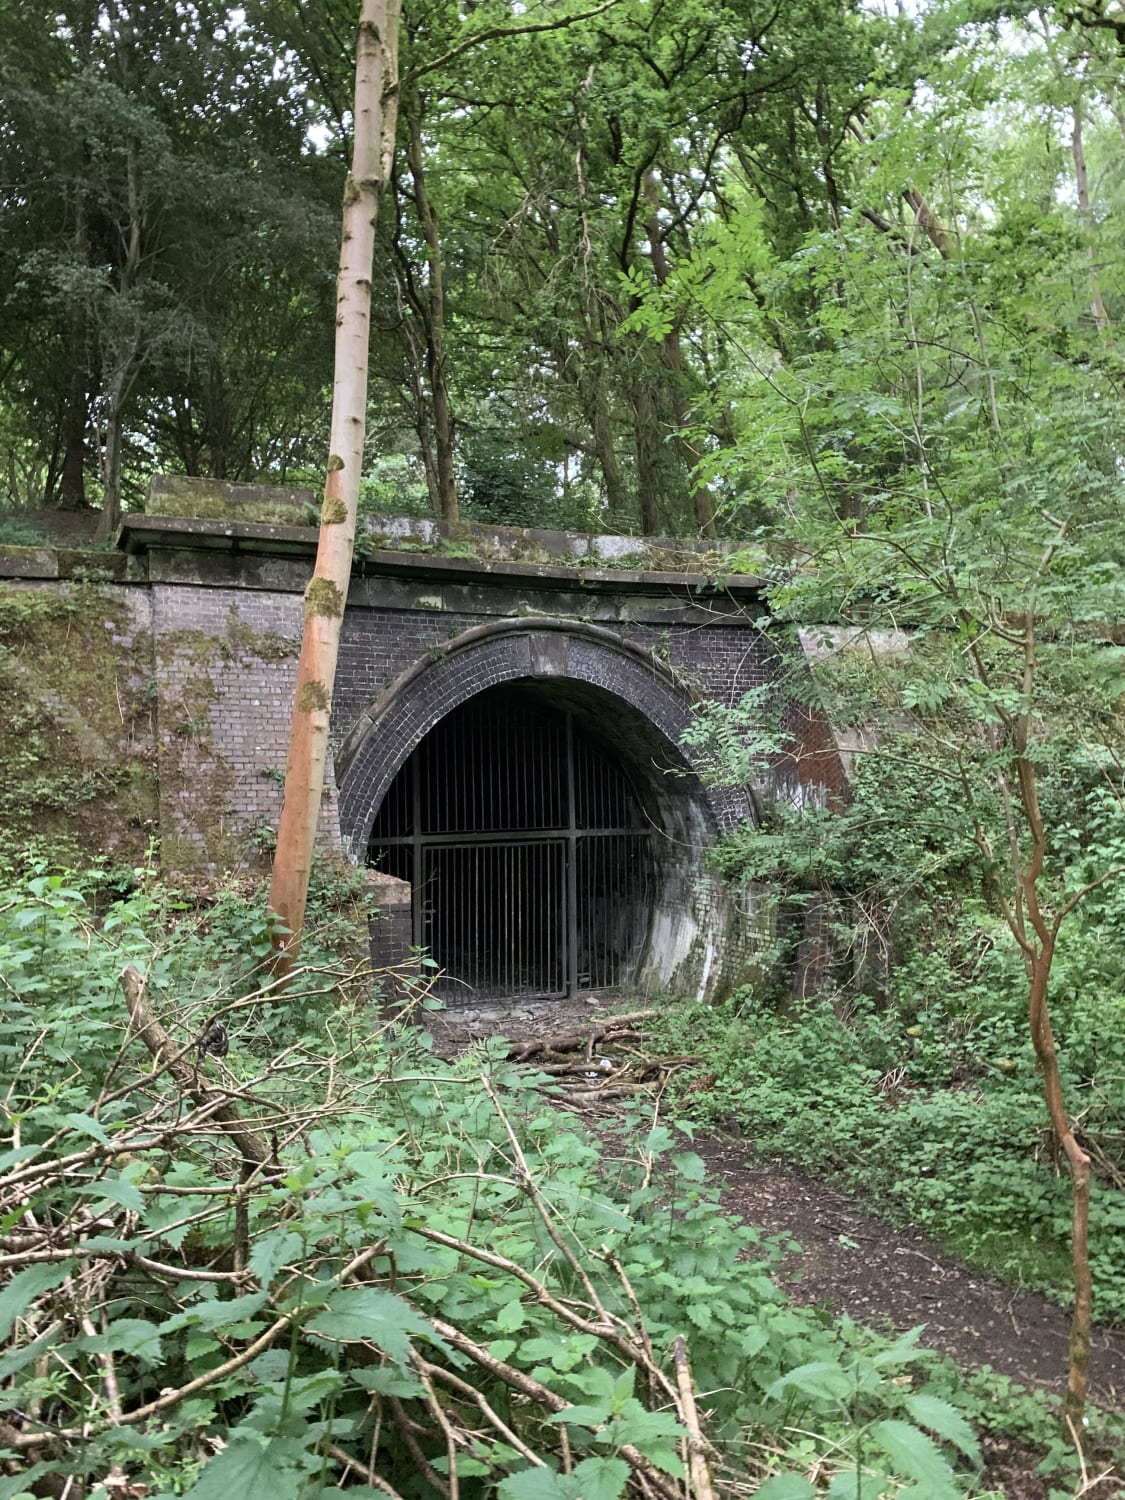 Abandoned railway tunnel in Northamptonshire? Built in the late 1850s and abandoned in the 1970’s.